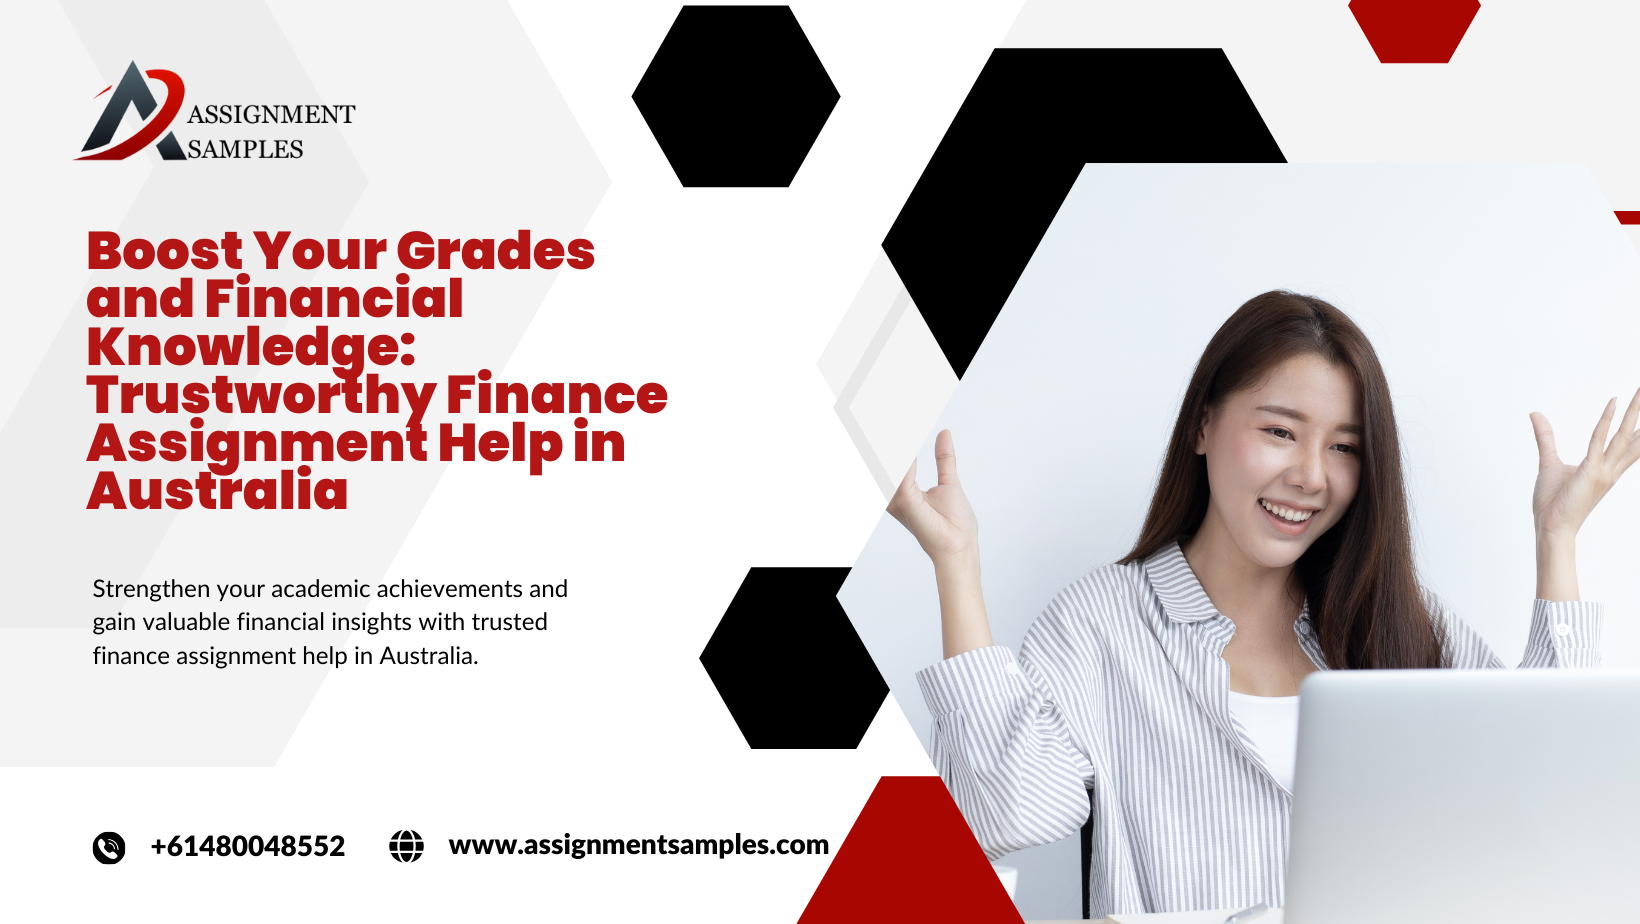 Boost Your Grades and Financial Knowledge: Trustworthy Finance Assignment Help in Australia